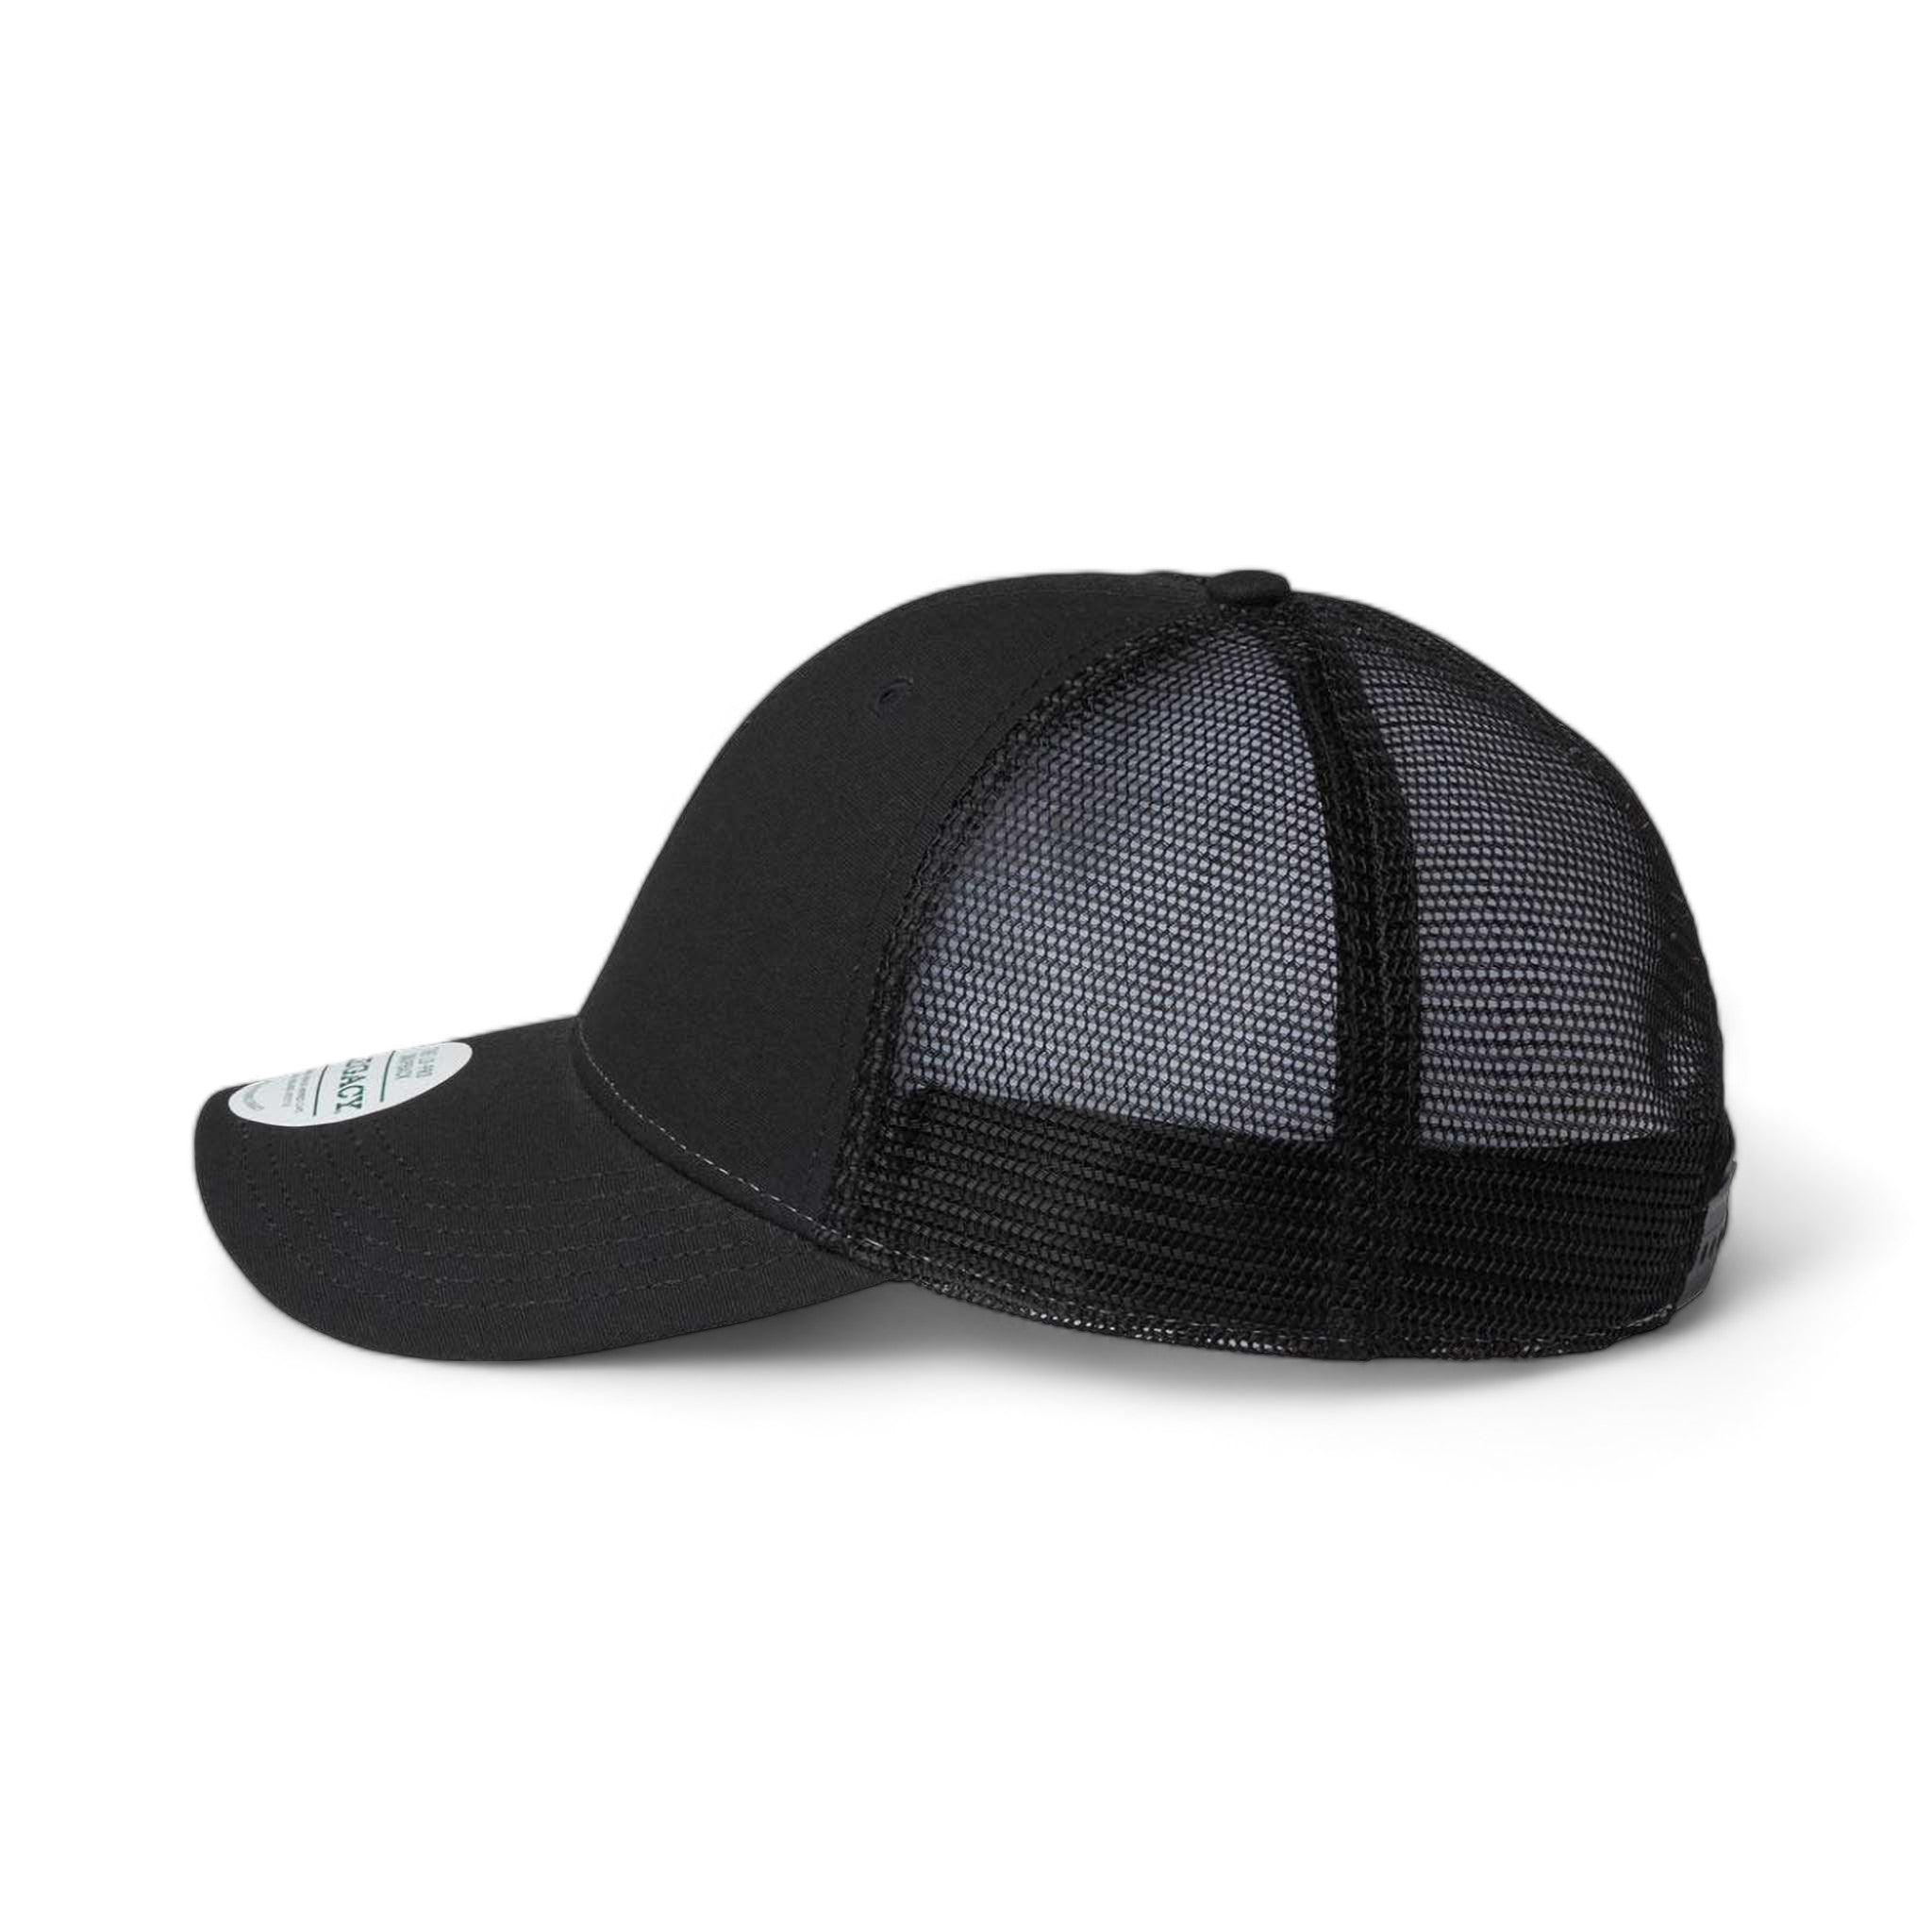 Side view of LEGACY LPS custom hat in black and black